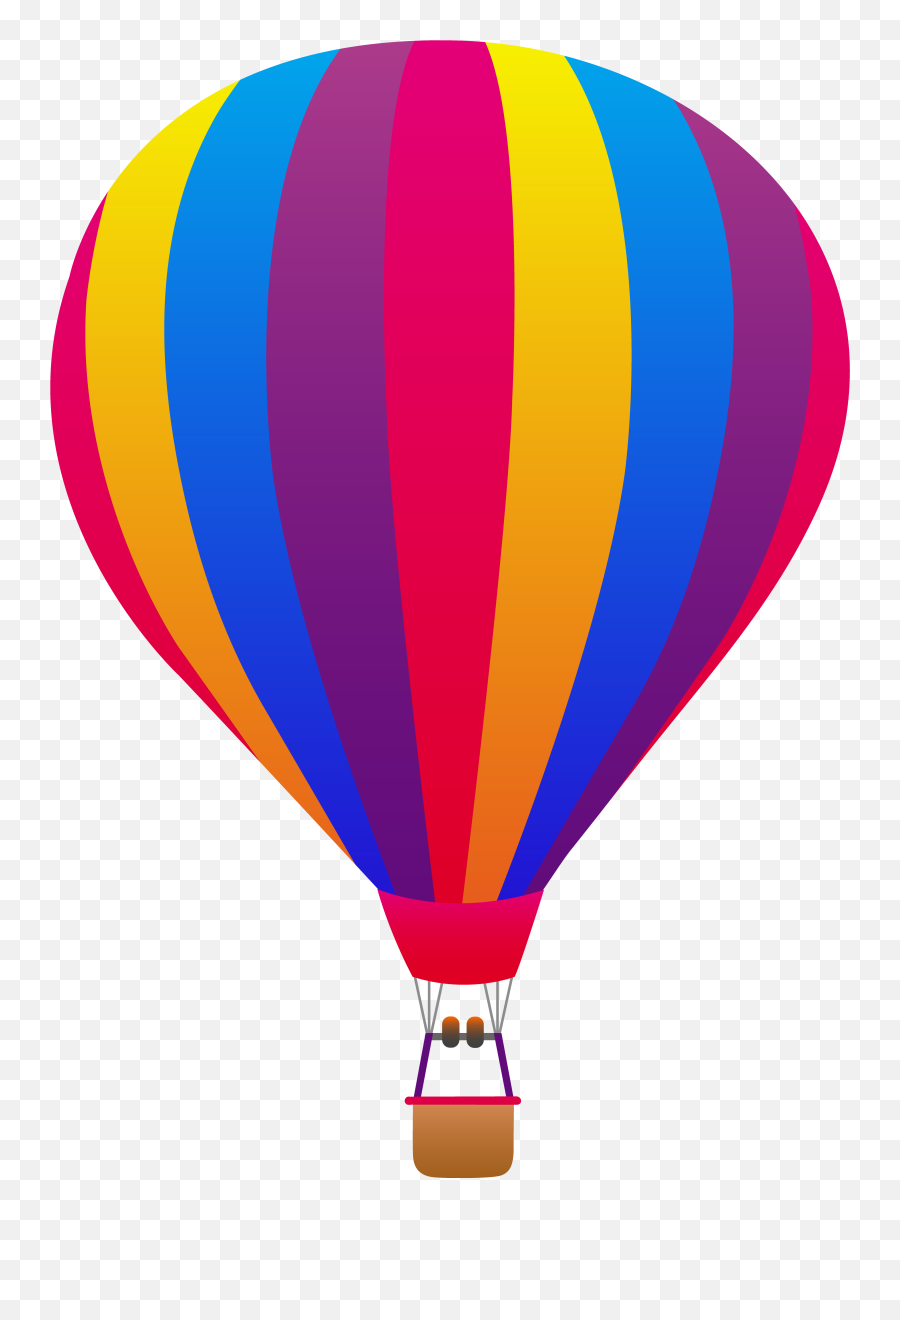 Air Balloon Png Transparent Background 46765 - Free Icons Clip Art Hot Air Balloon,Balloons Png Transparent Background